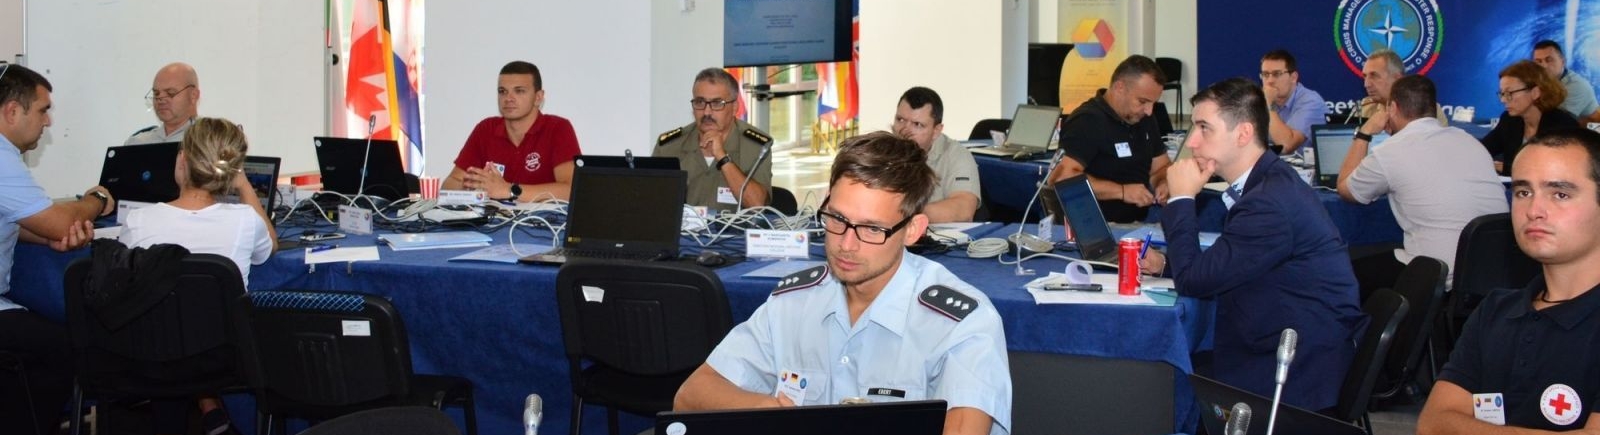 Crisis Management and Disaster Response Exercise Planners Training Hybrid (residential and on-line) Course (NATO APPROVED; NATO ETOC Code: ETE-CM-21785)